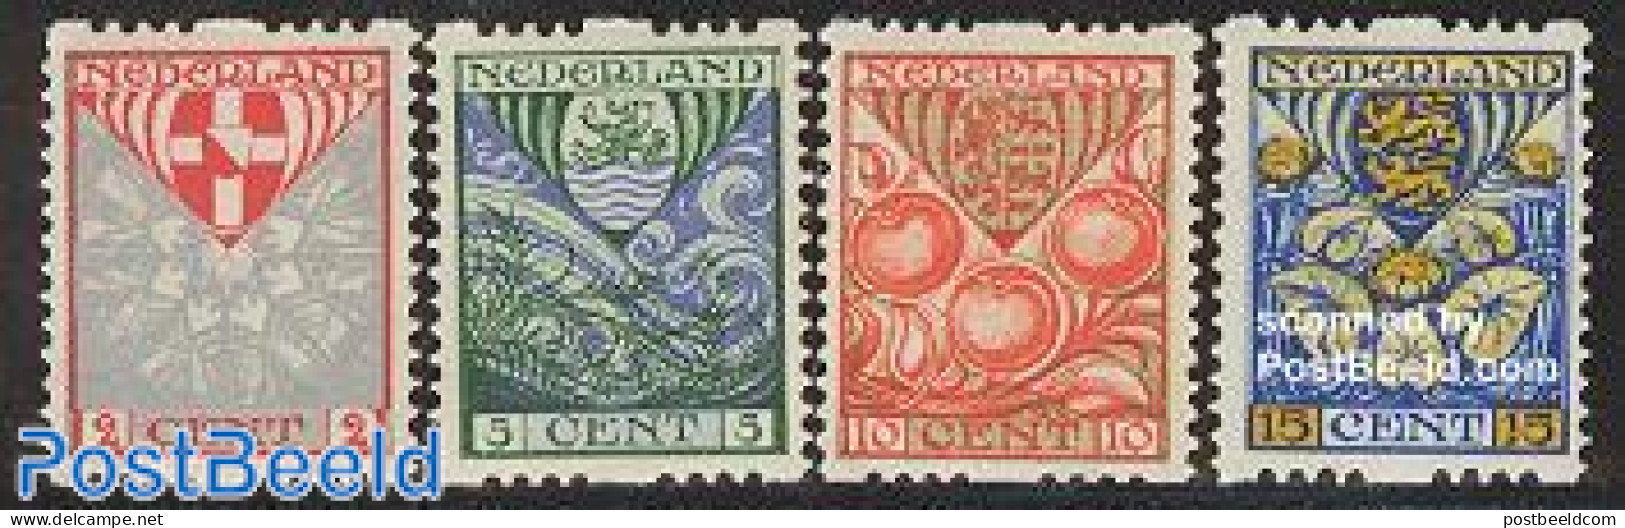 Netherlands 1926 Child Welfare 4v, Syncopatic Perf., Mint NH, History - Nature - Coat Of Arms - Flowers & Plants - Fruit - Unused Stamps